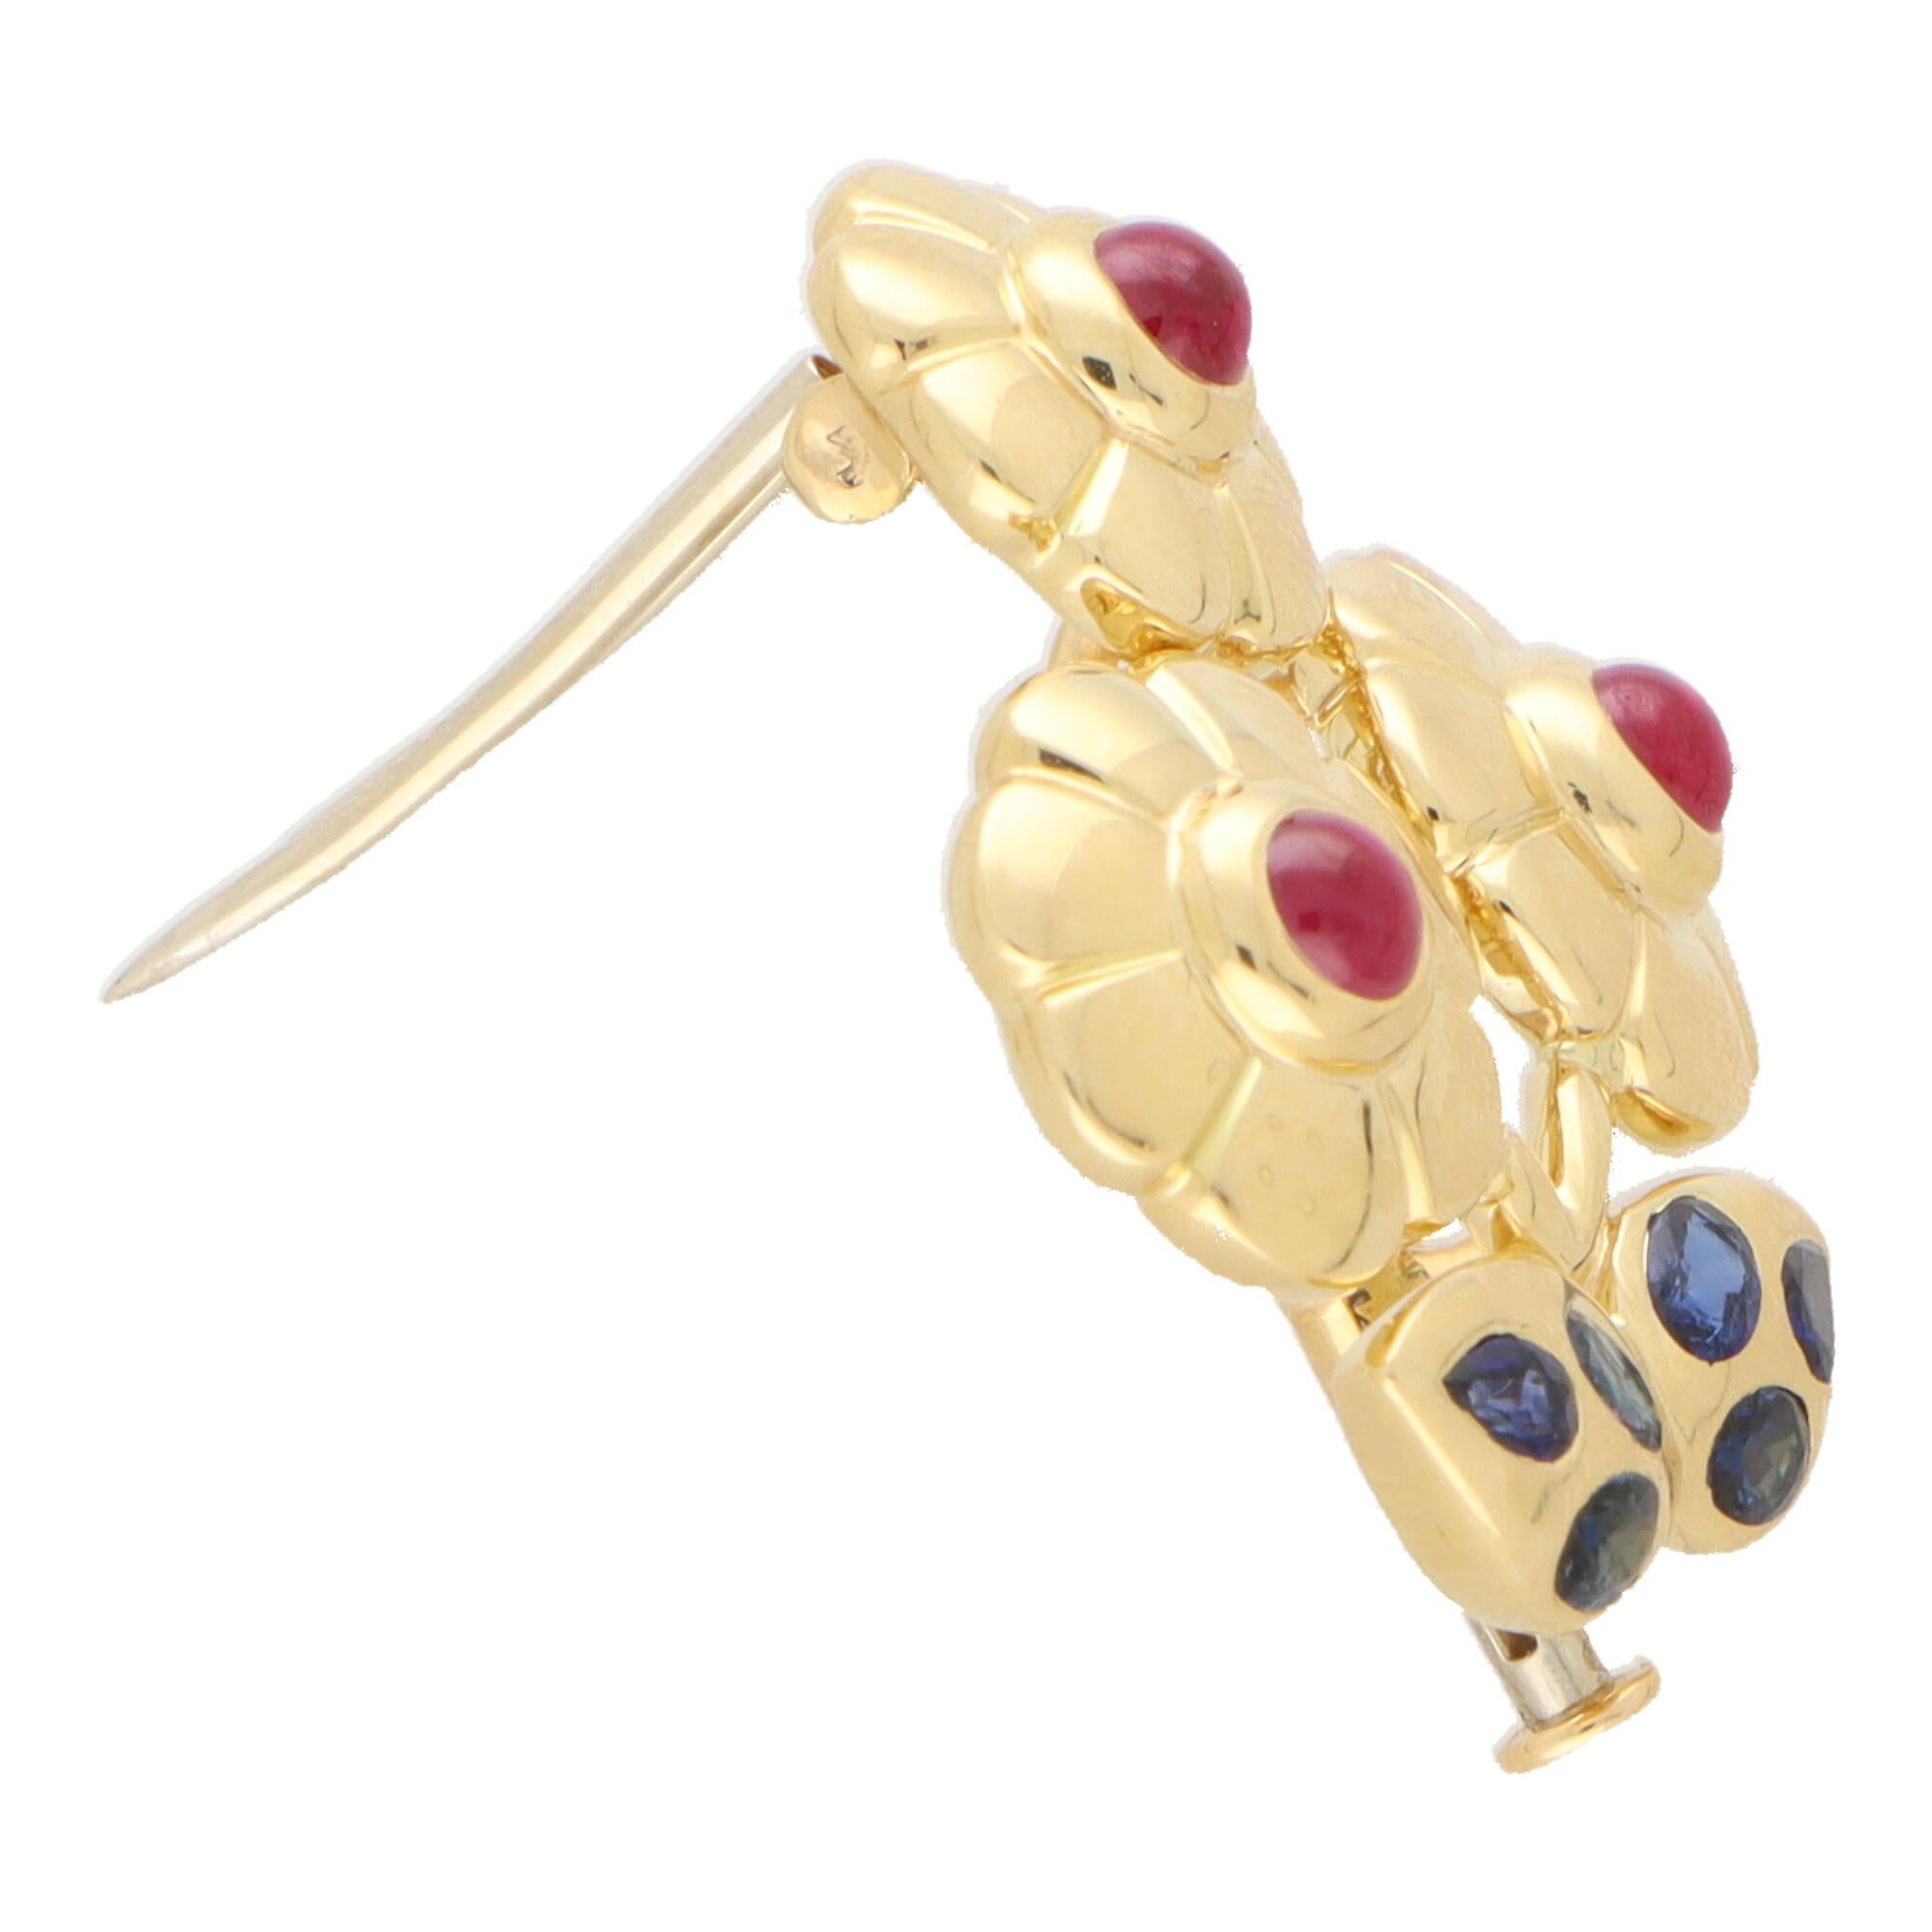 A beautiful vintage Cartier blue sapphire and ruby flower brooch set in 18k yellow gold.

The brooch depicts a beautiful flower display and secured to reverse with a double pin fitting. Each flower is set to the centre with a vibrant cabochon ruby